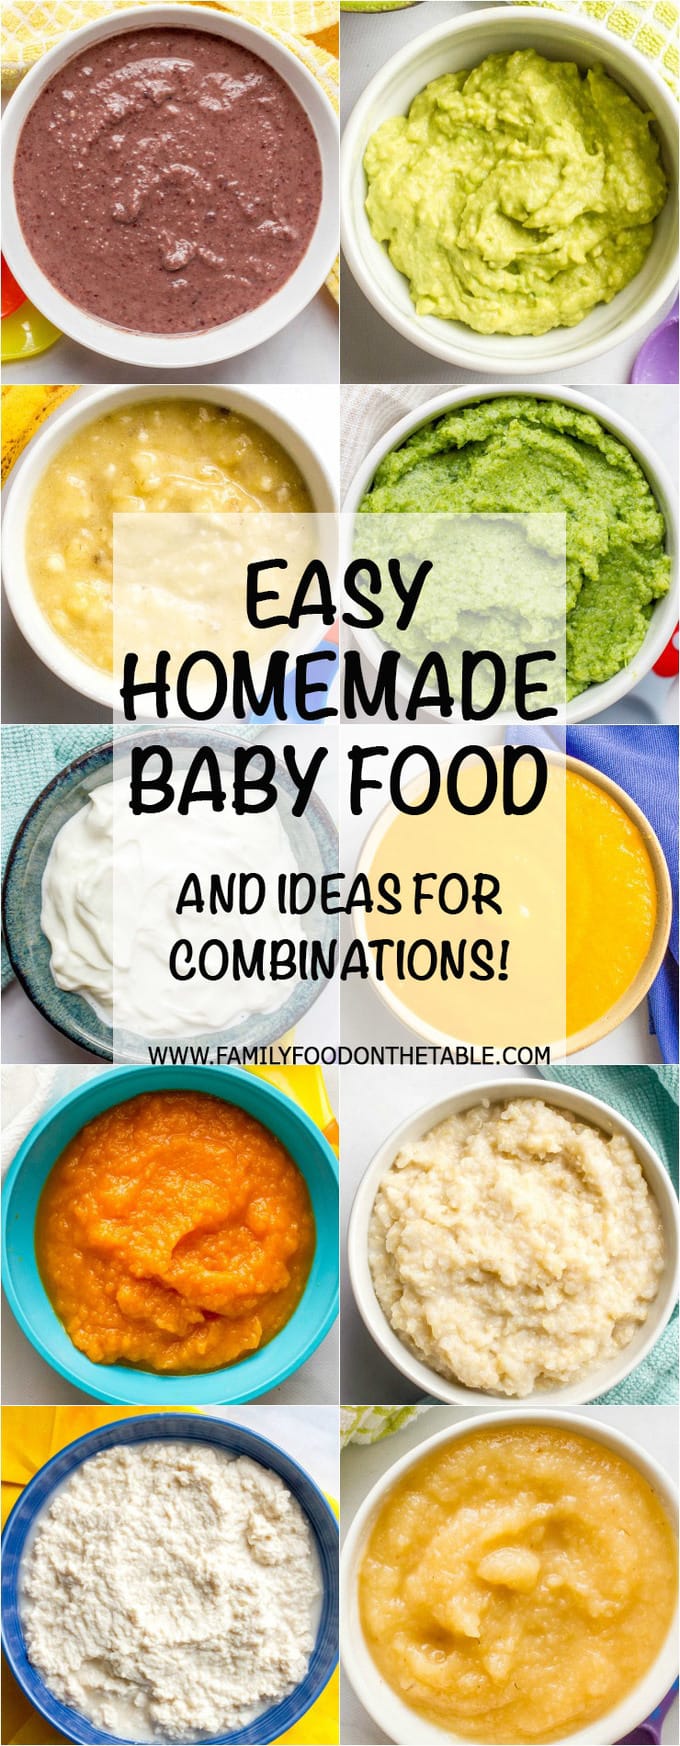 Homemade baby food combinations - Family Food on the Table